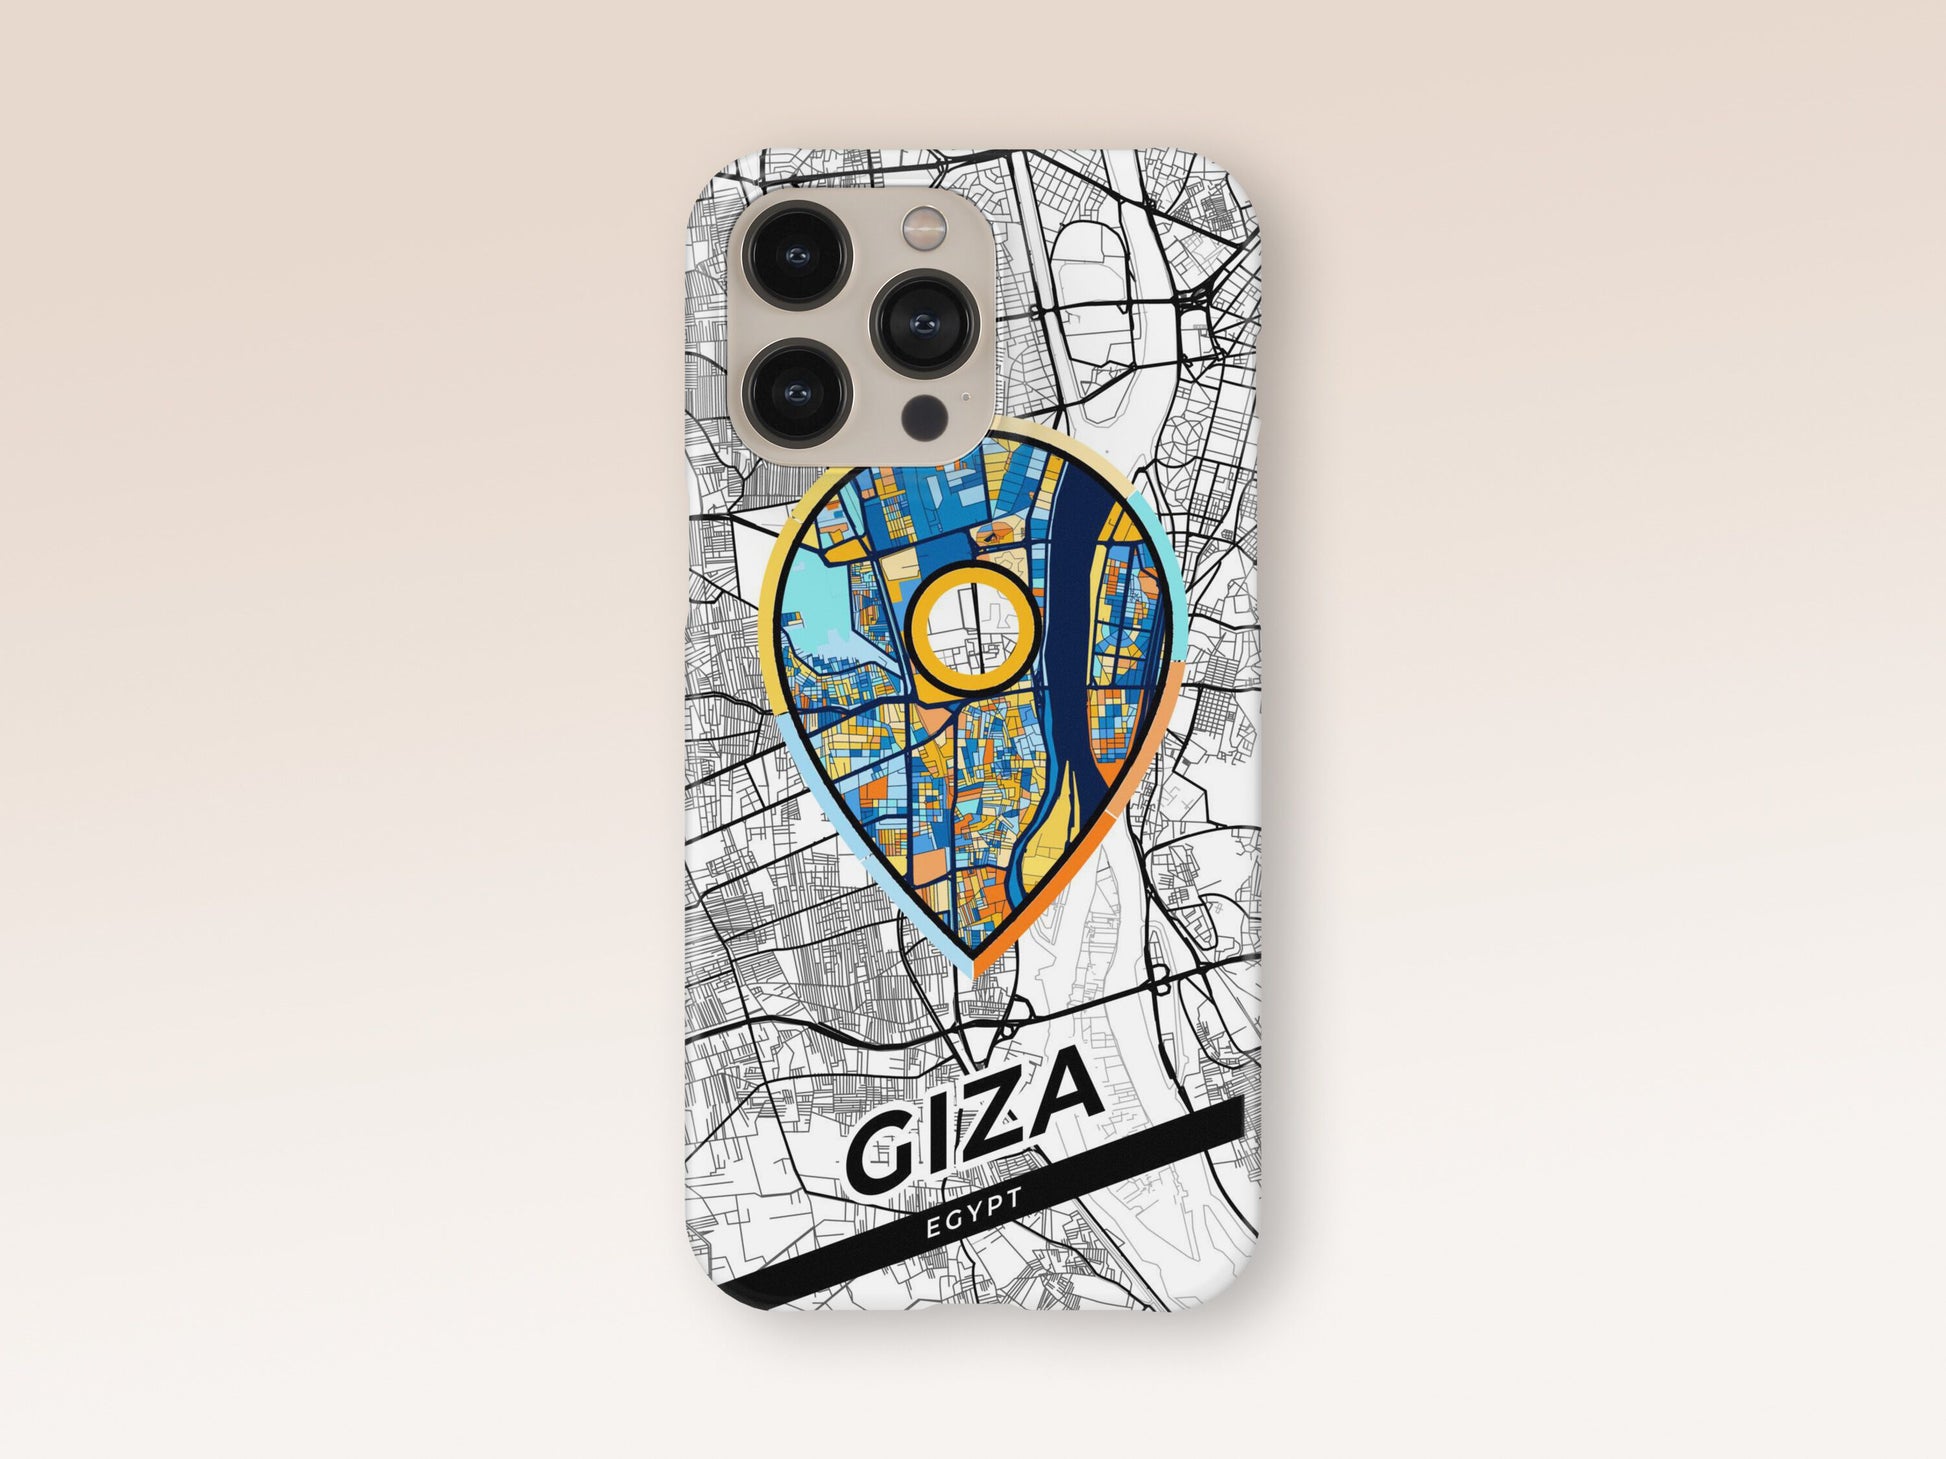 Giza Egypt slim phone case with colorful icon. Birthday, wedding or housewarming gift. Couple match cases. 1